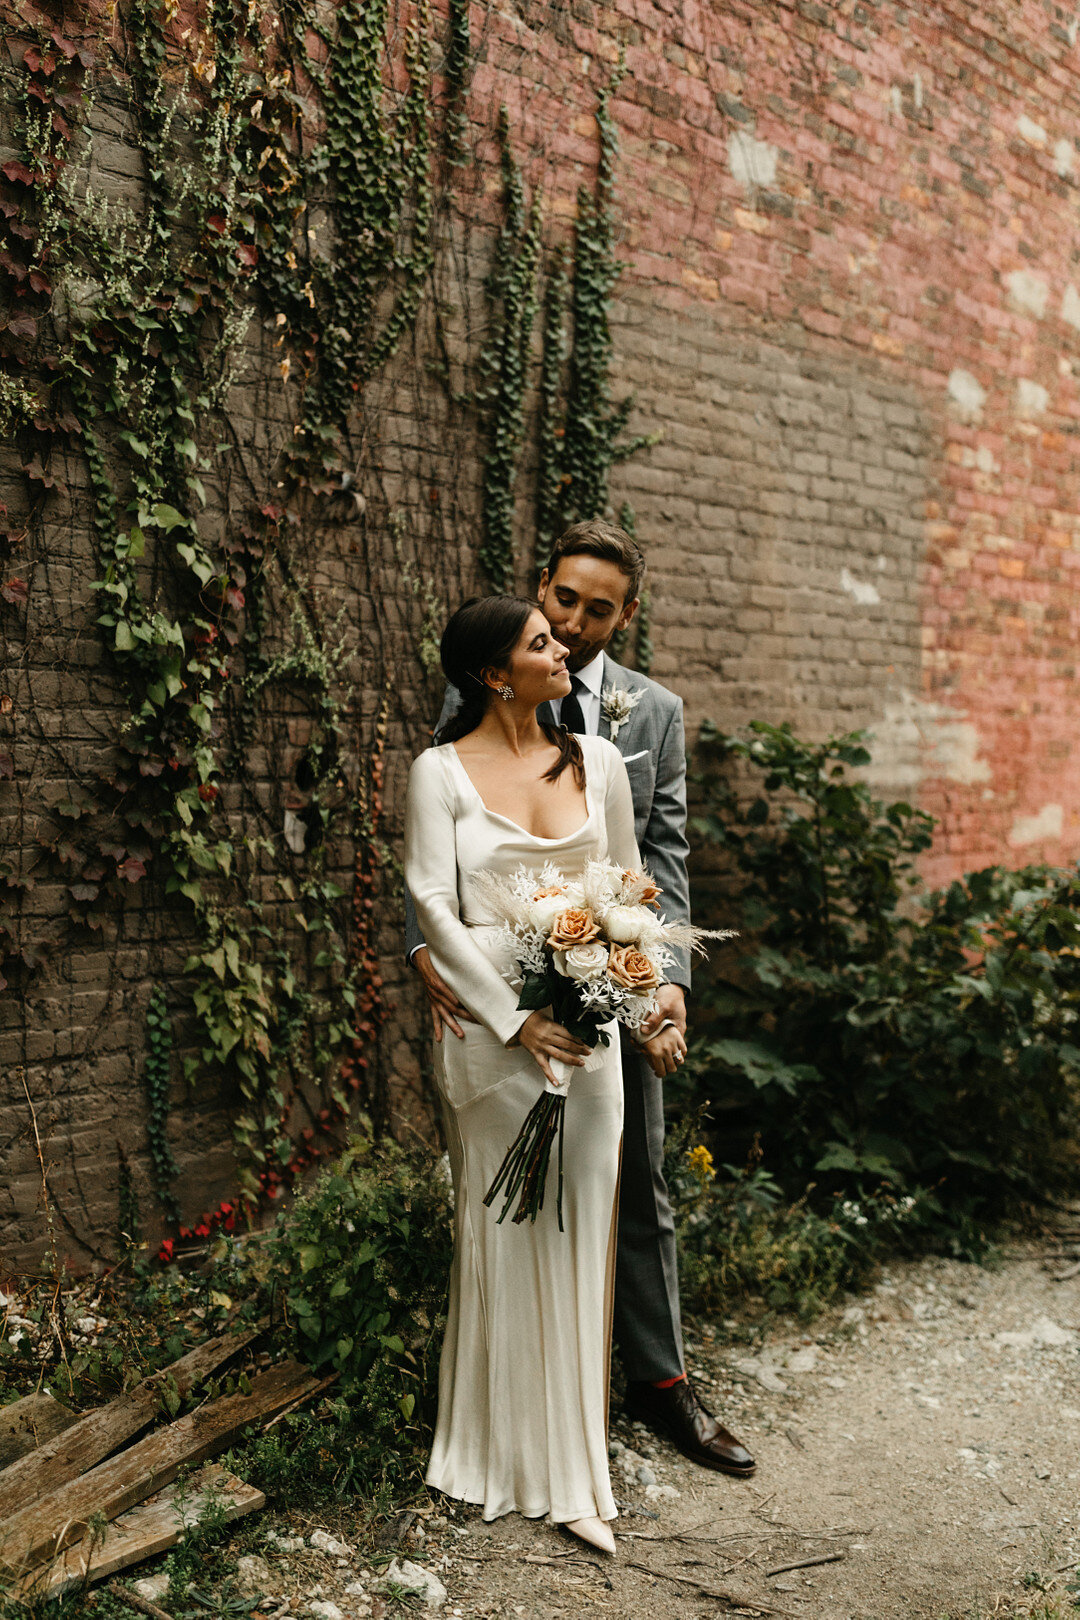 Modern Chicago Elopement at Eden captured by We Are The Bowsers | CHI thee WED